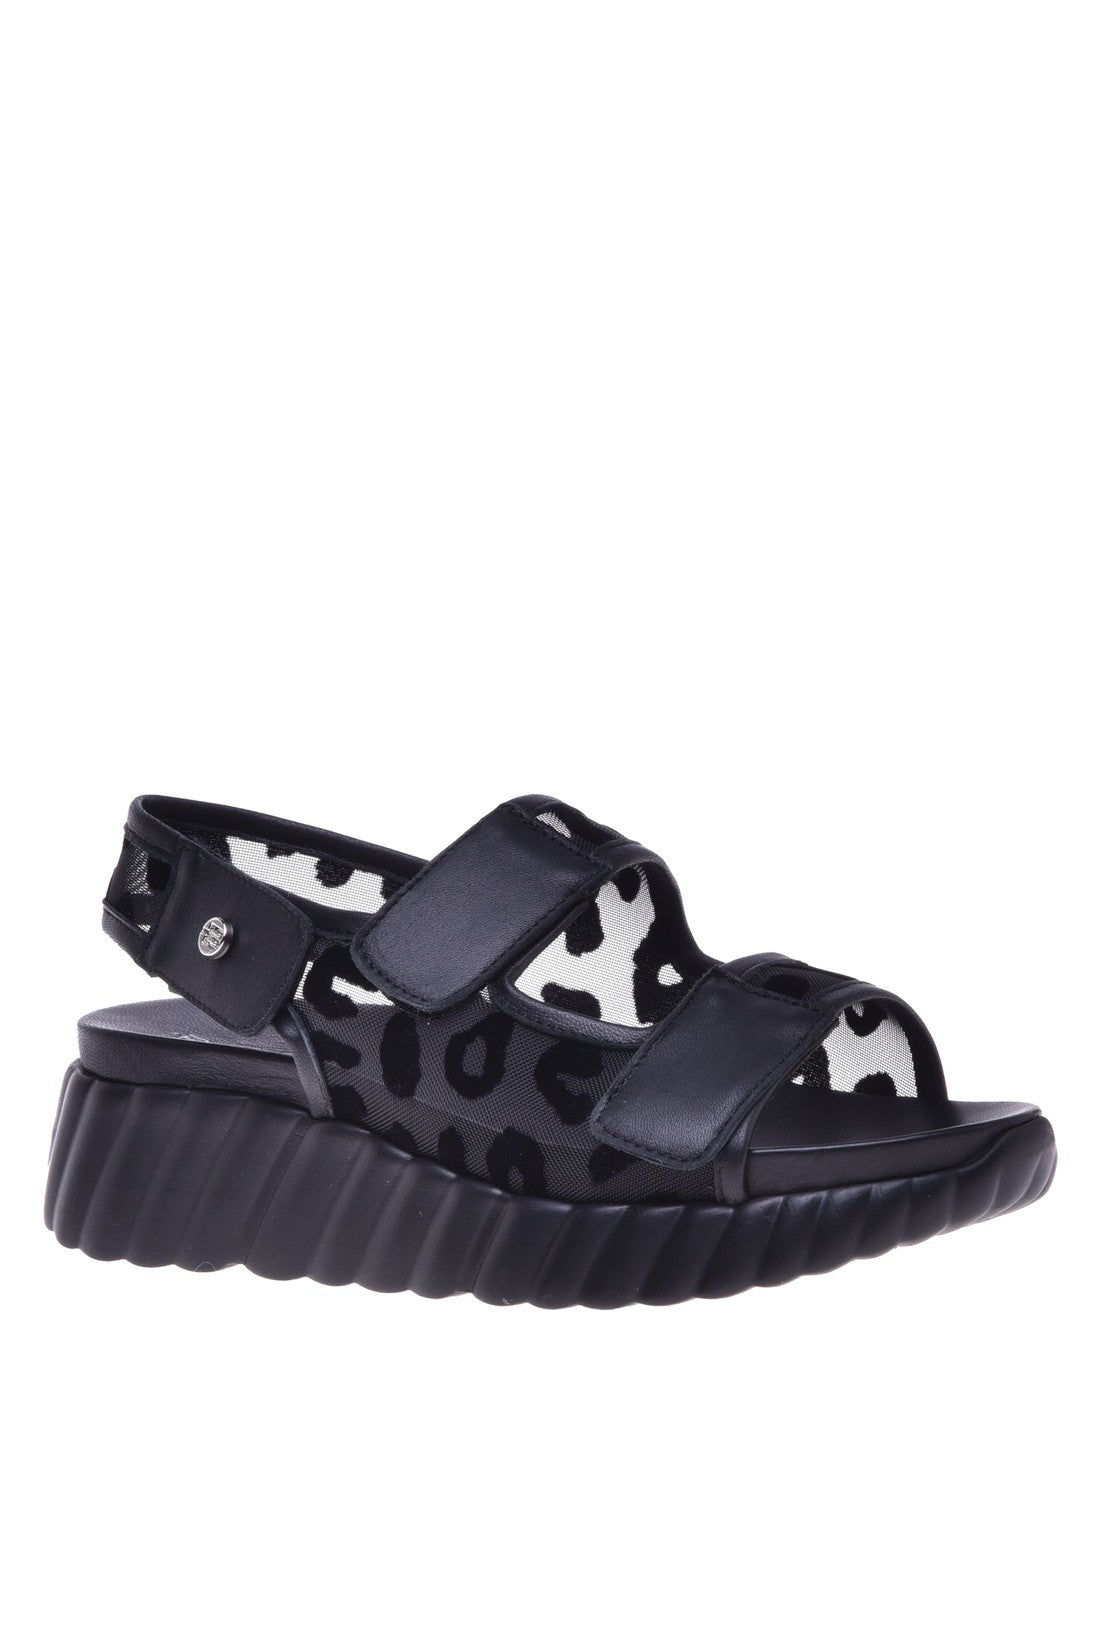 Sandal in black nappa leather and lace